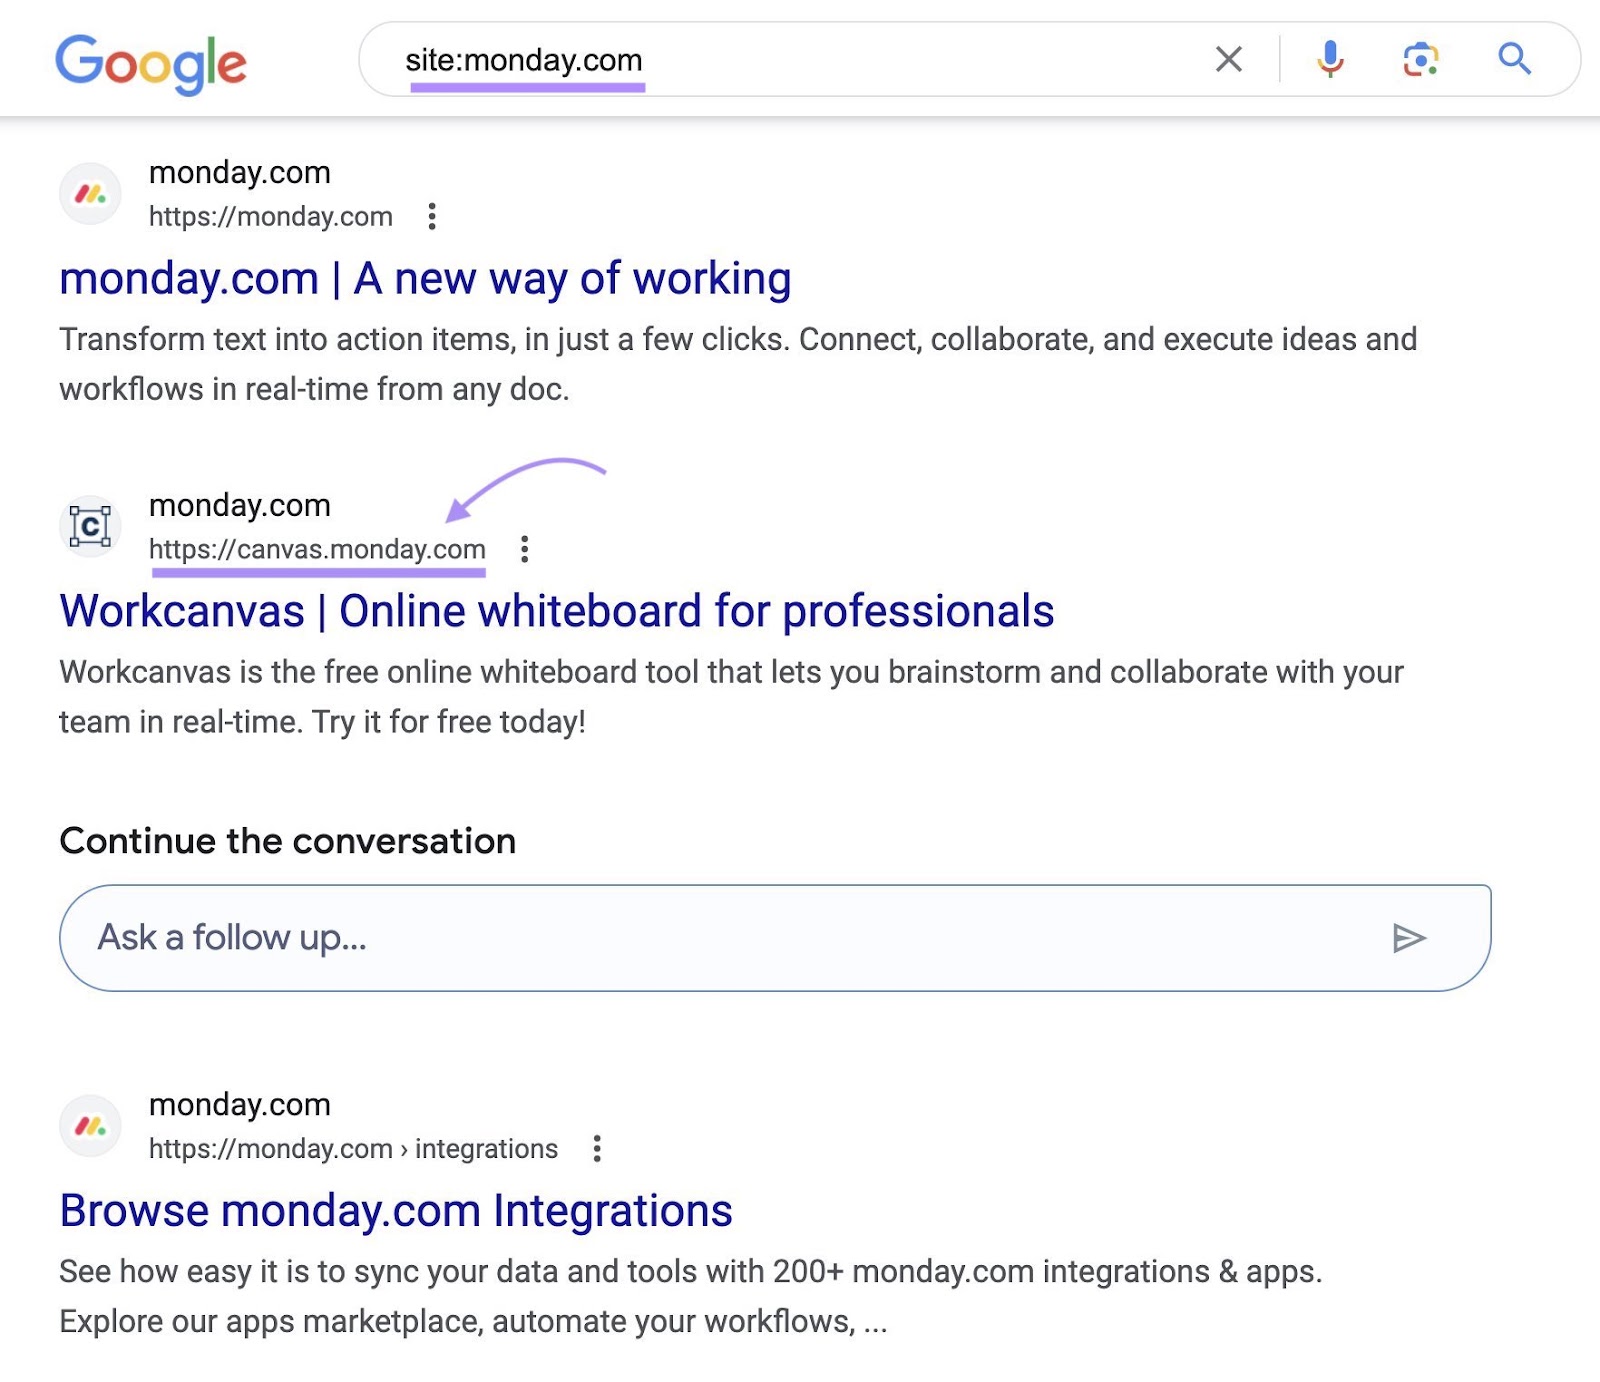 //canvas.moday.com" highlighted successful  Google's SERP for "site:monday.com" tract  search